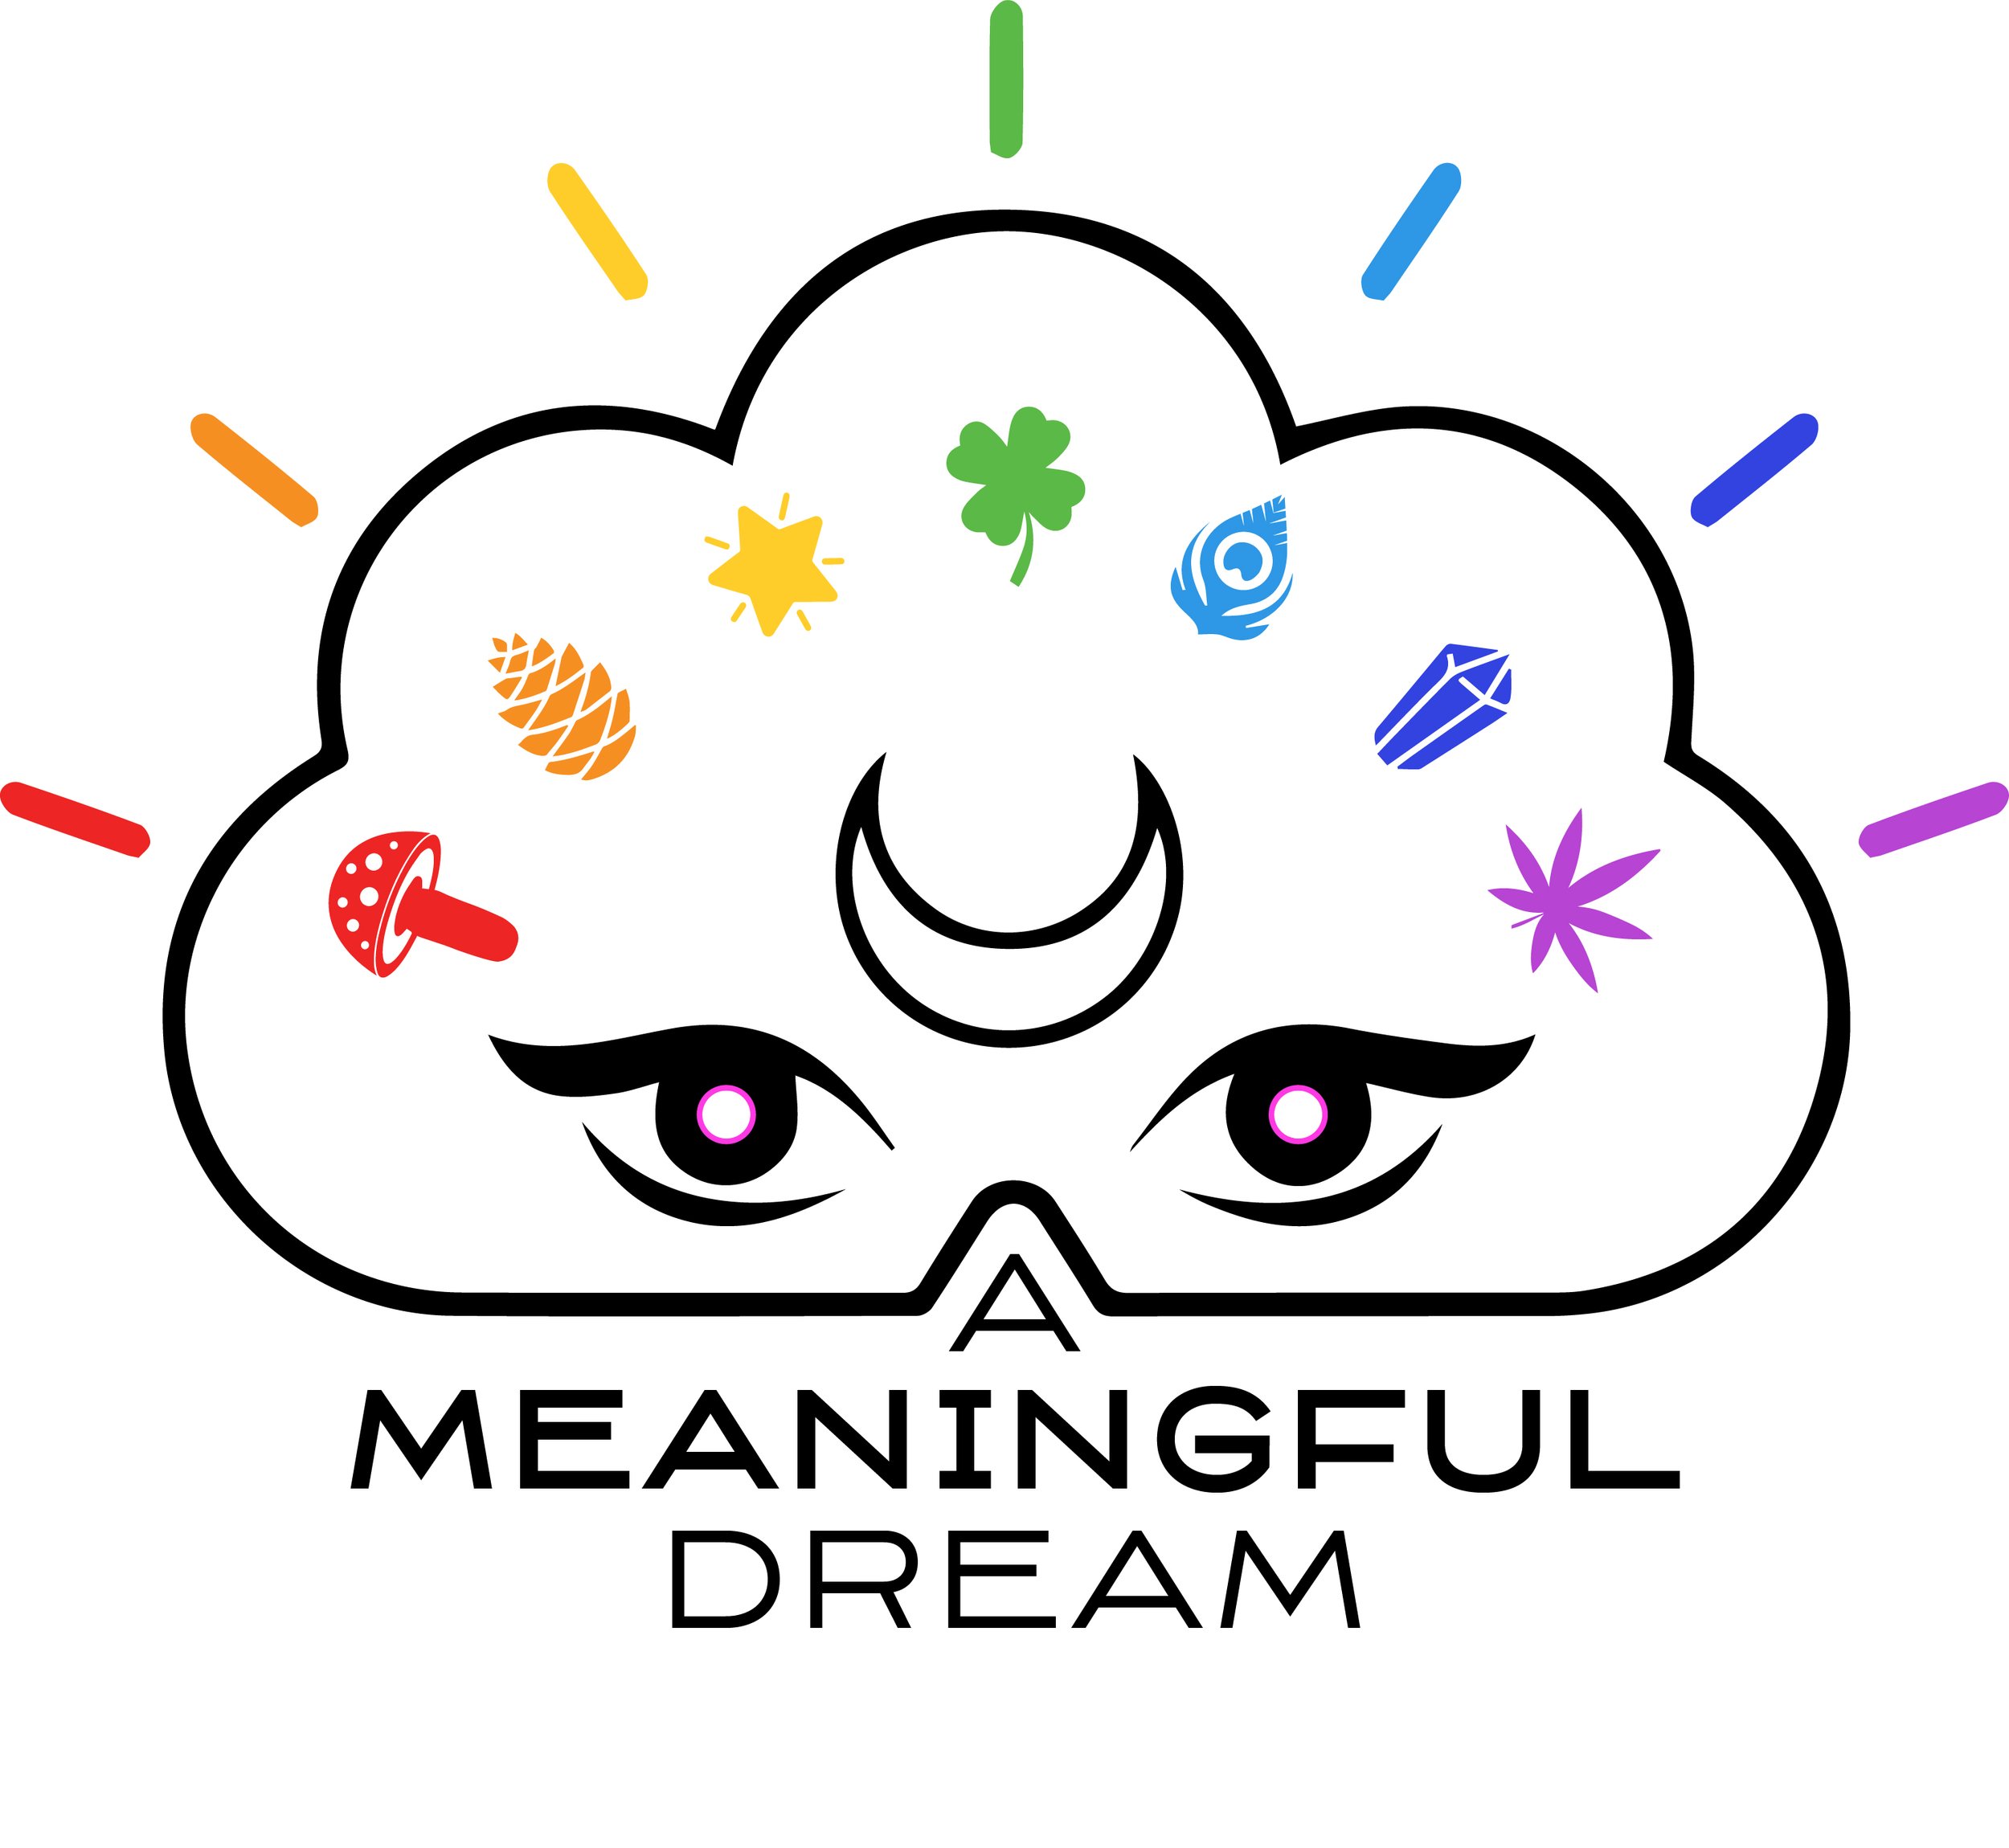 A Meaningful Dream  - Apothecary, Tarot, Magic, Astrology, Limpias, Healings, Red Tent, Dreams